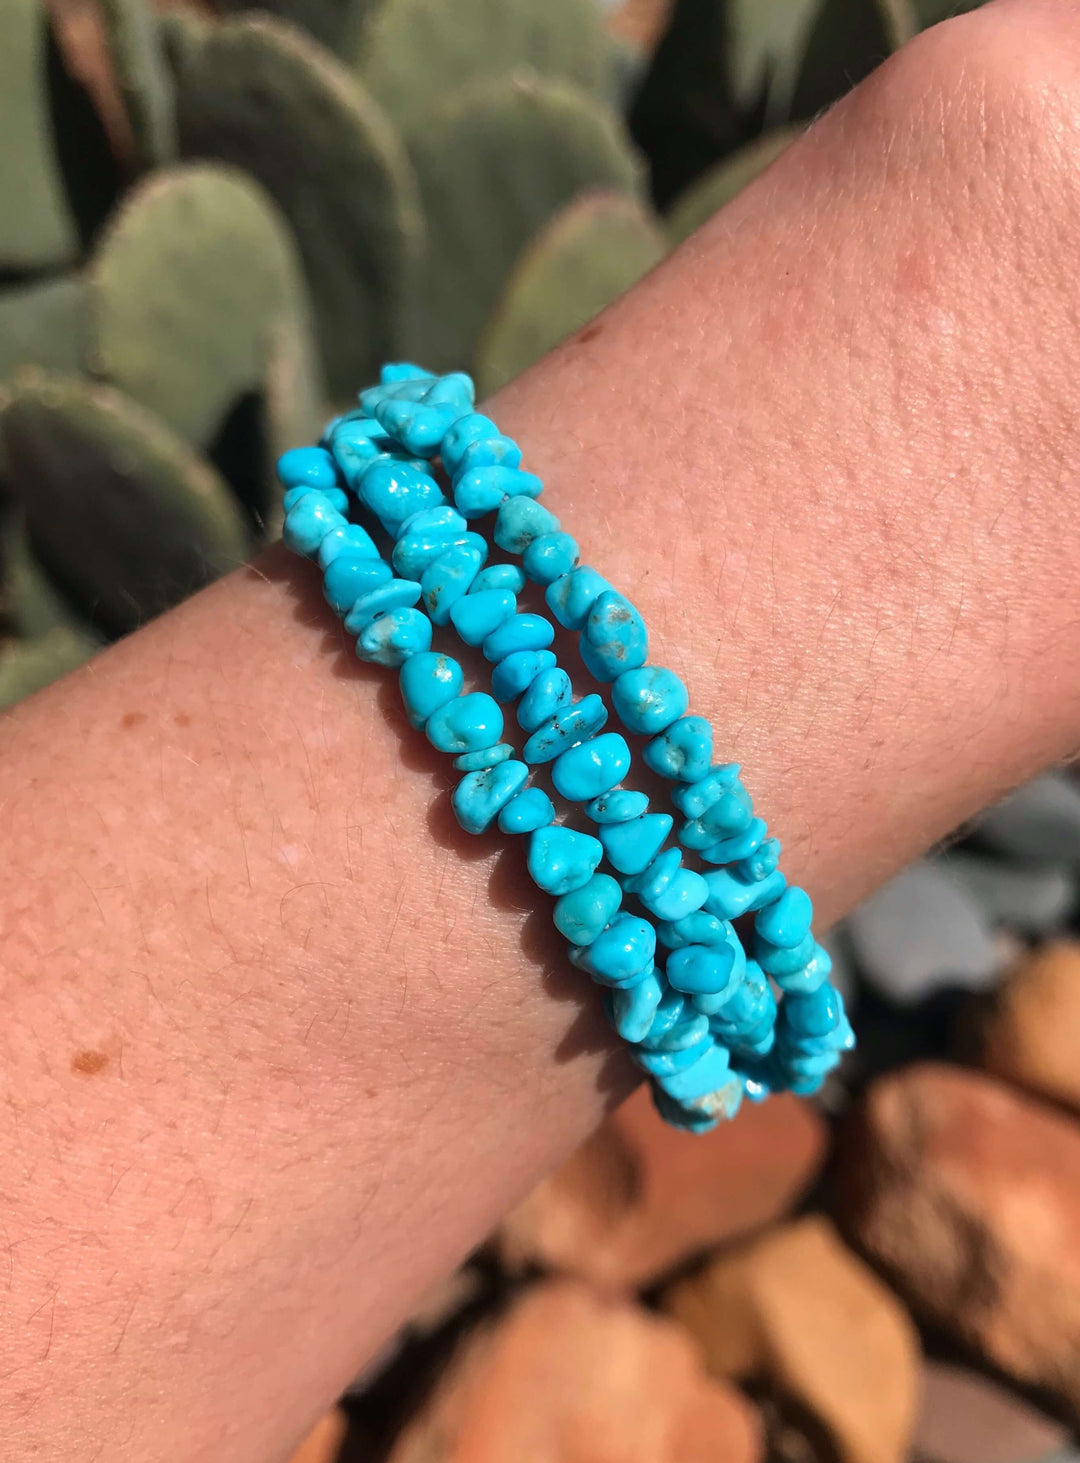 The Cochise Bracelet-Bracelets & Cuffs-Calli Co., Turquoise and Silver Jewelry, Native American Handmade, Zuni Tribe, Navajo Tribe, Brock Texas